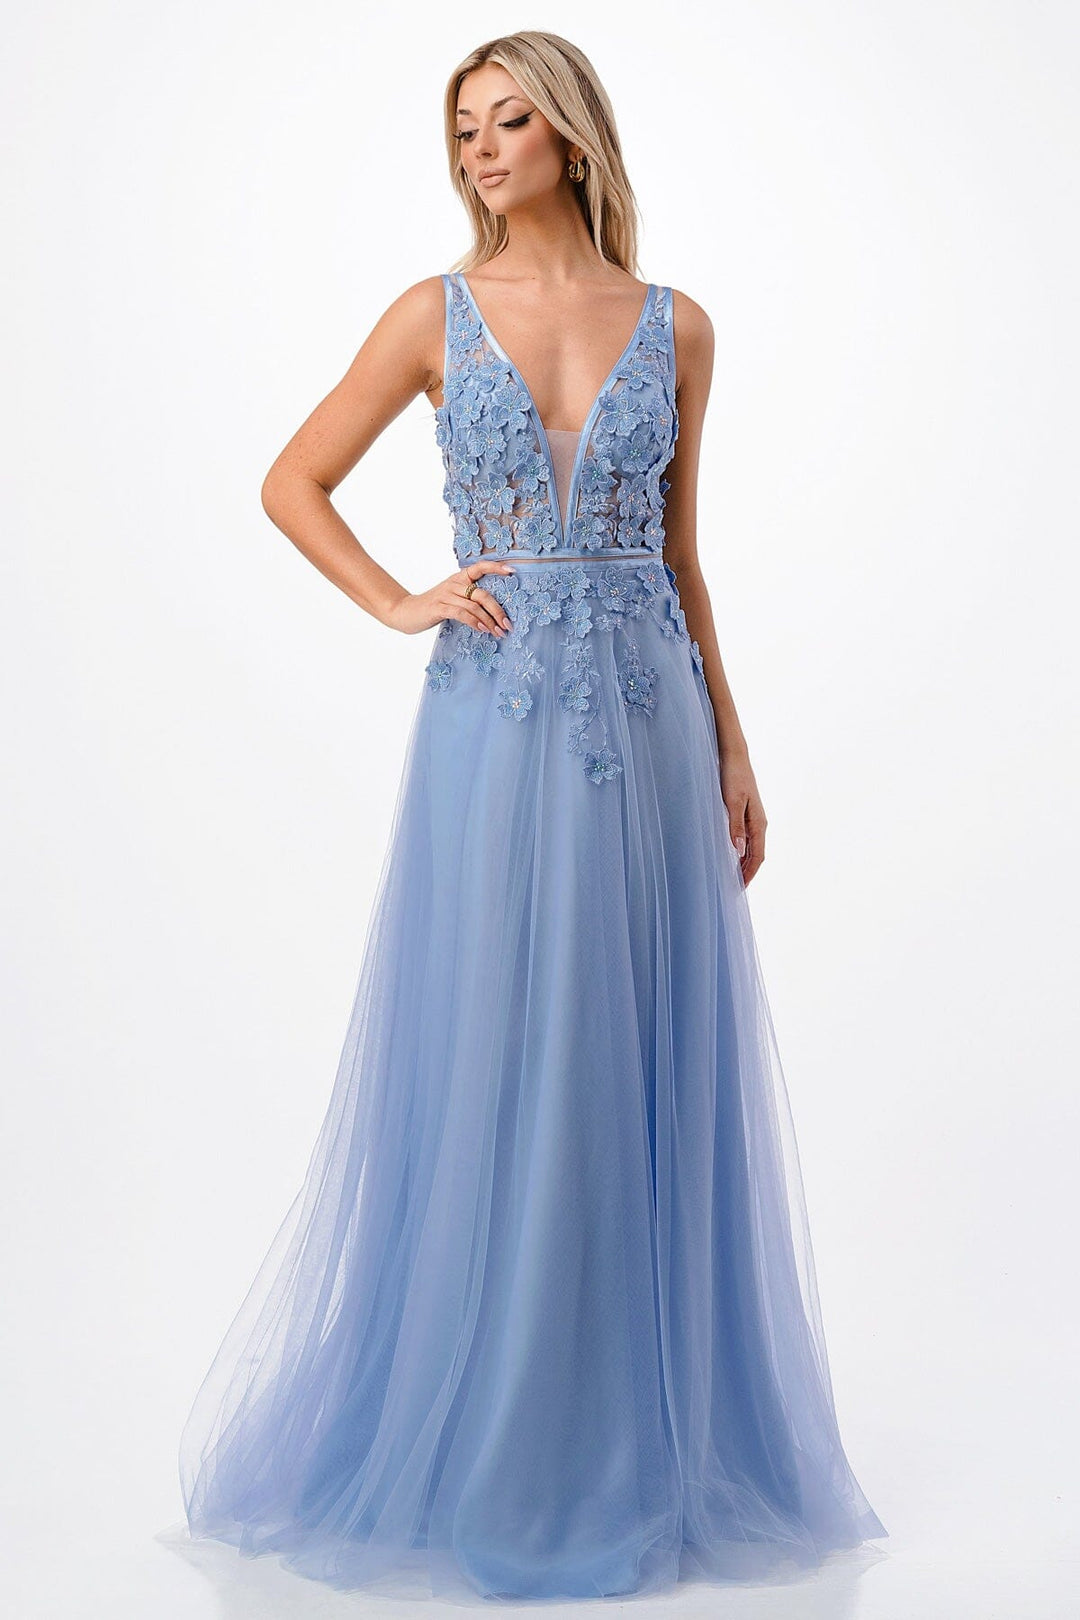 3D Floral Deep V-Neck Tulle Gown by Coya P2114